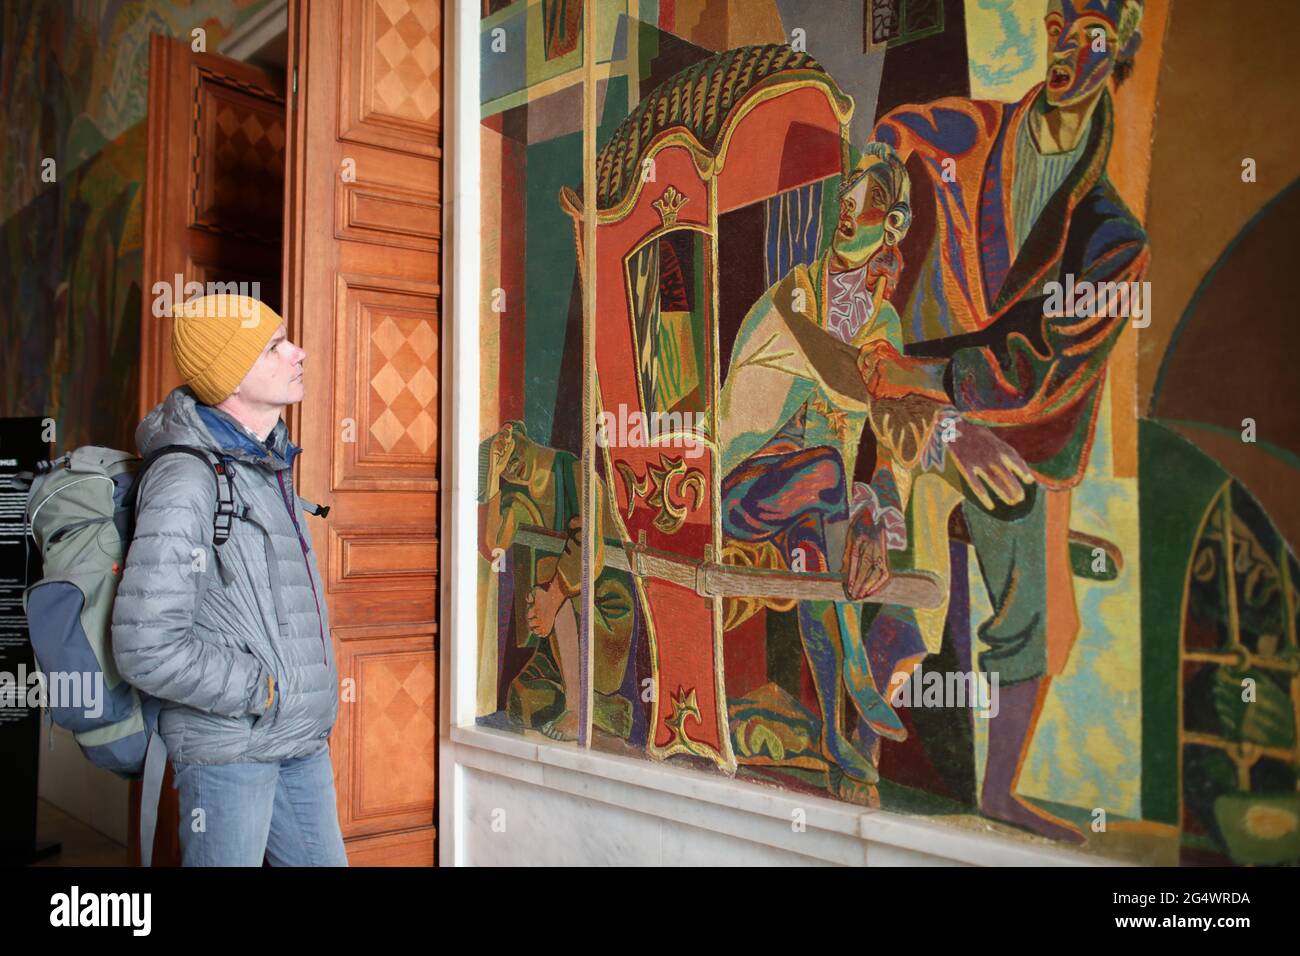 Tourist looking at the mural painting inside the Oslo City Hall, Oslo, Norway Stock Photo